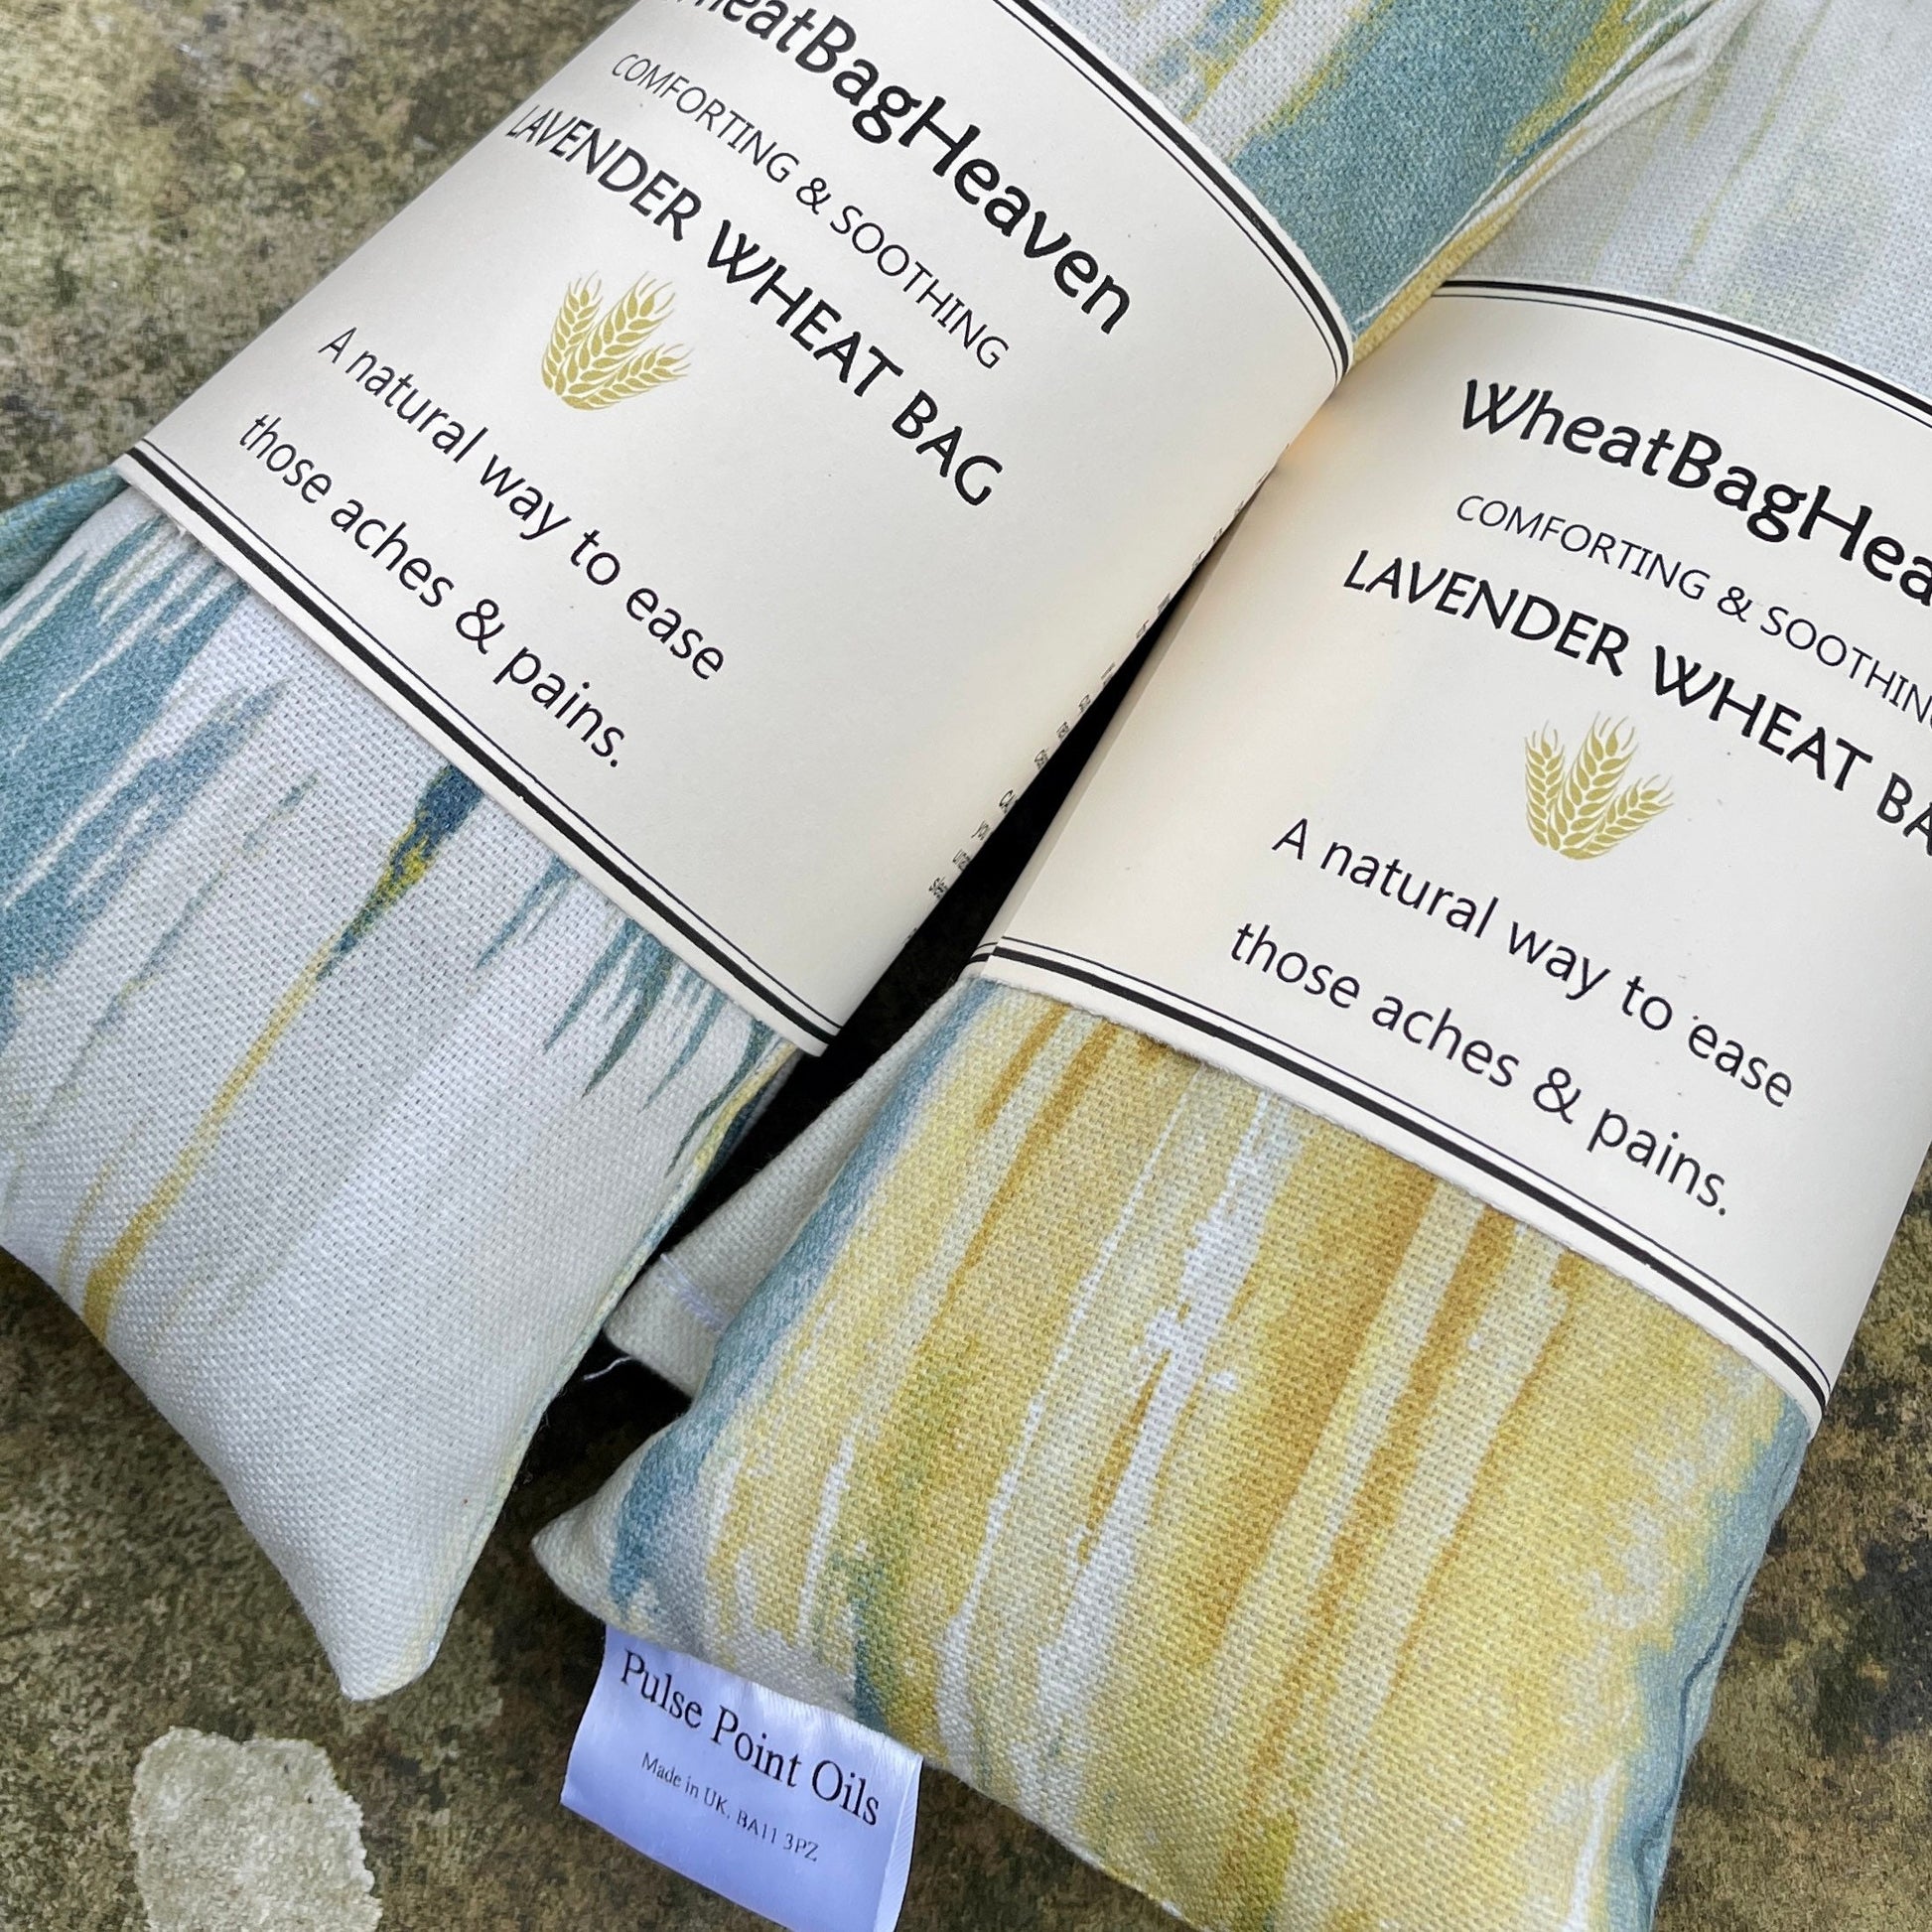 Two Lavender heating pad, LongBeach. Herbal Wheat bag comforter for relaxation and sleep.